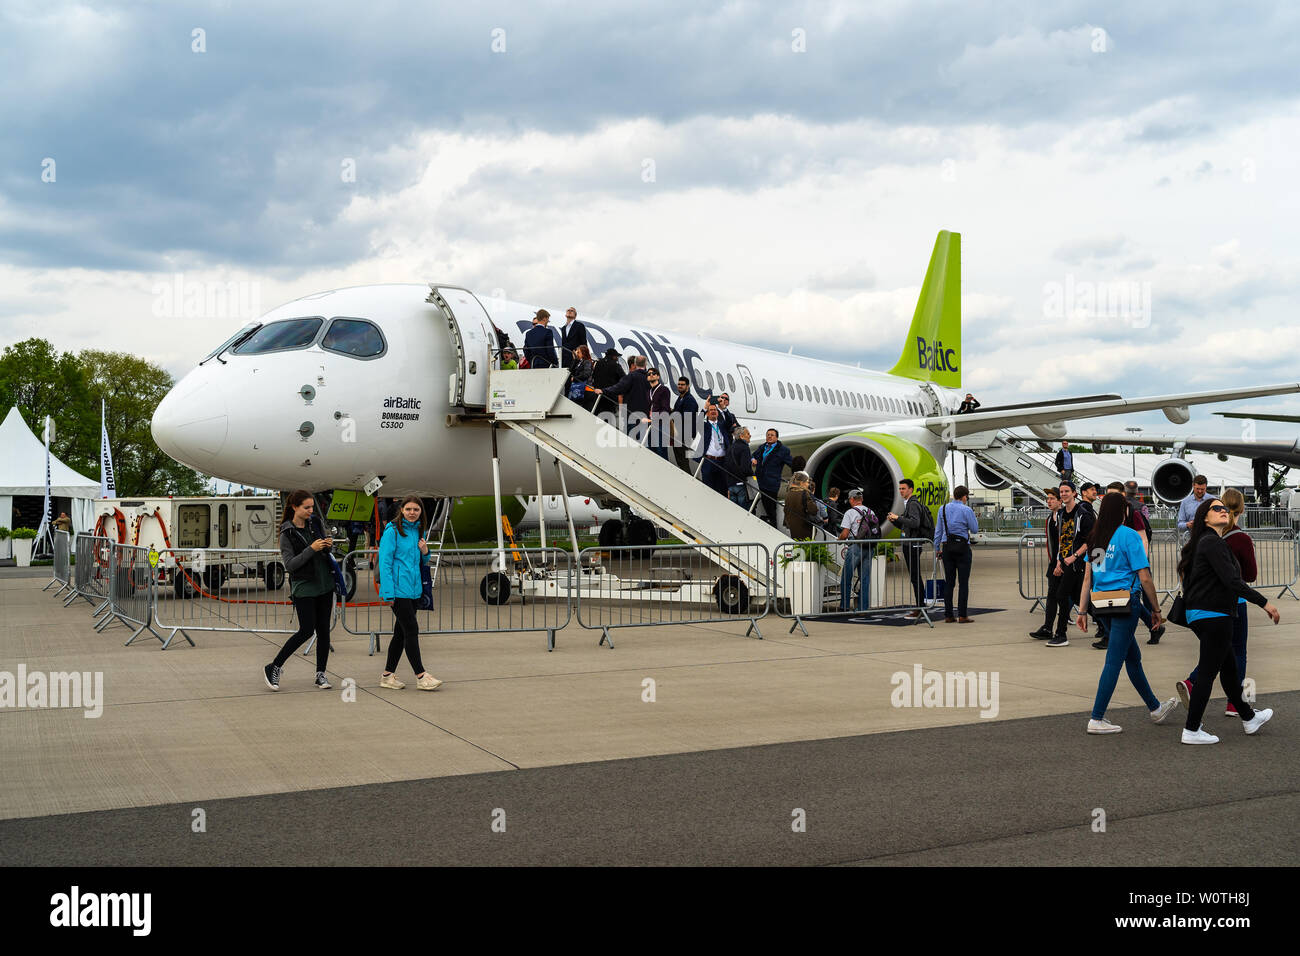 BERLIN - APRIL 27, 2018: The narrow-body jet airliner Bombardier CS300, by AirBaltic. Exhibition ILA Berlin Air Show 2018. Stock Photo